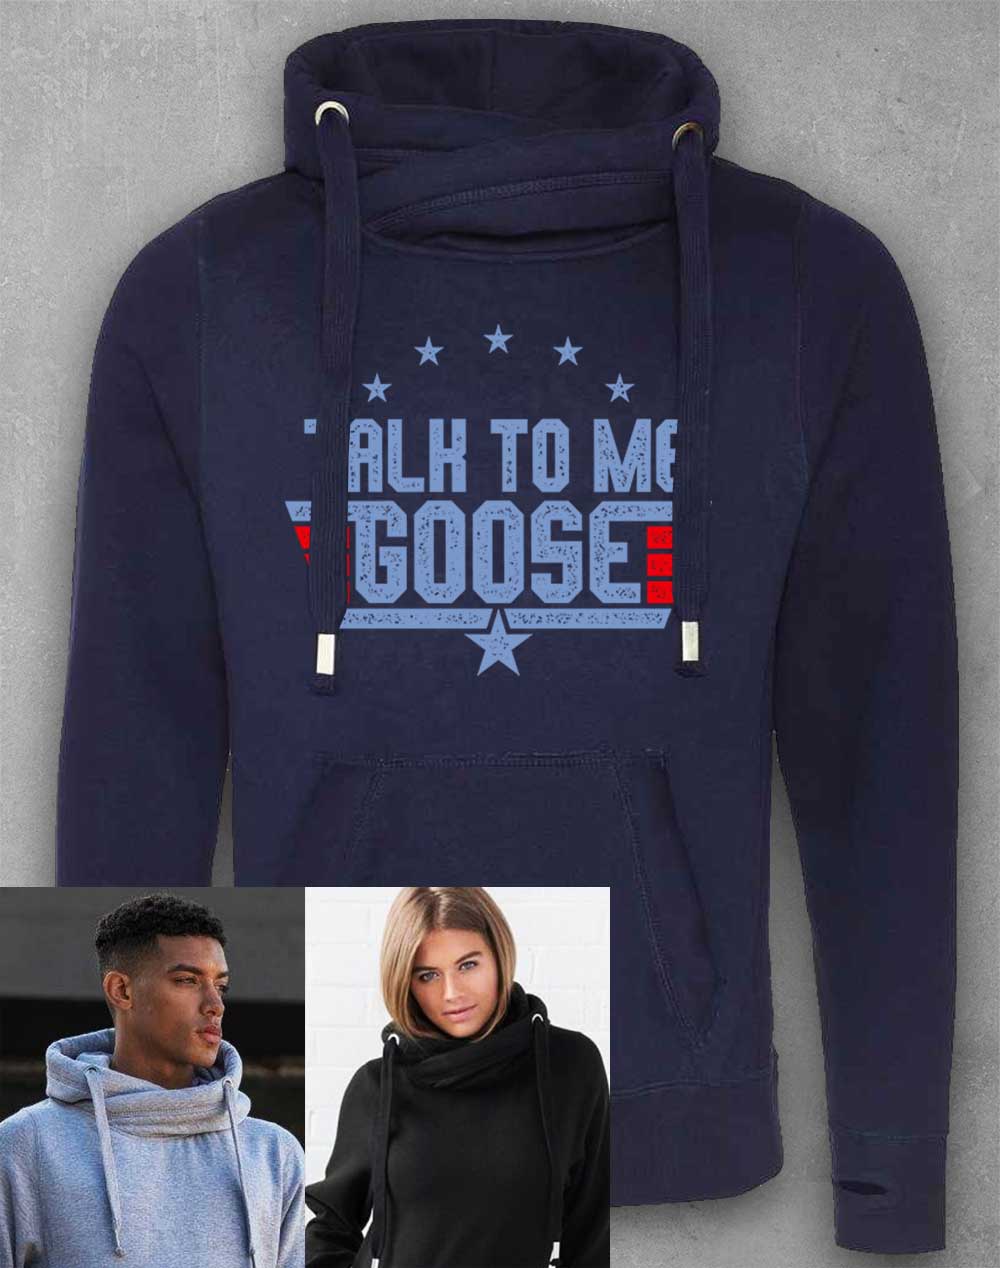 Oxford Navy - Talk to me Goose Chunky Cross Neck Hoodie